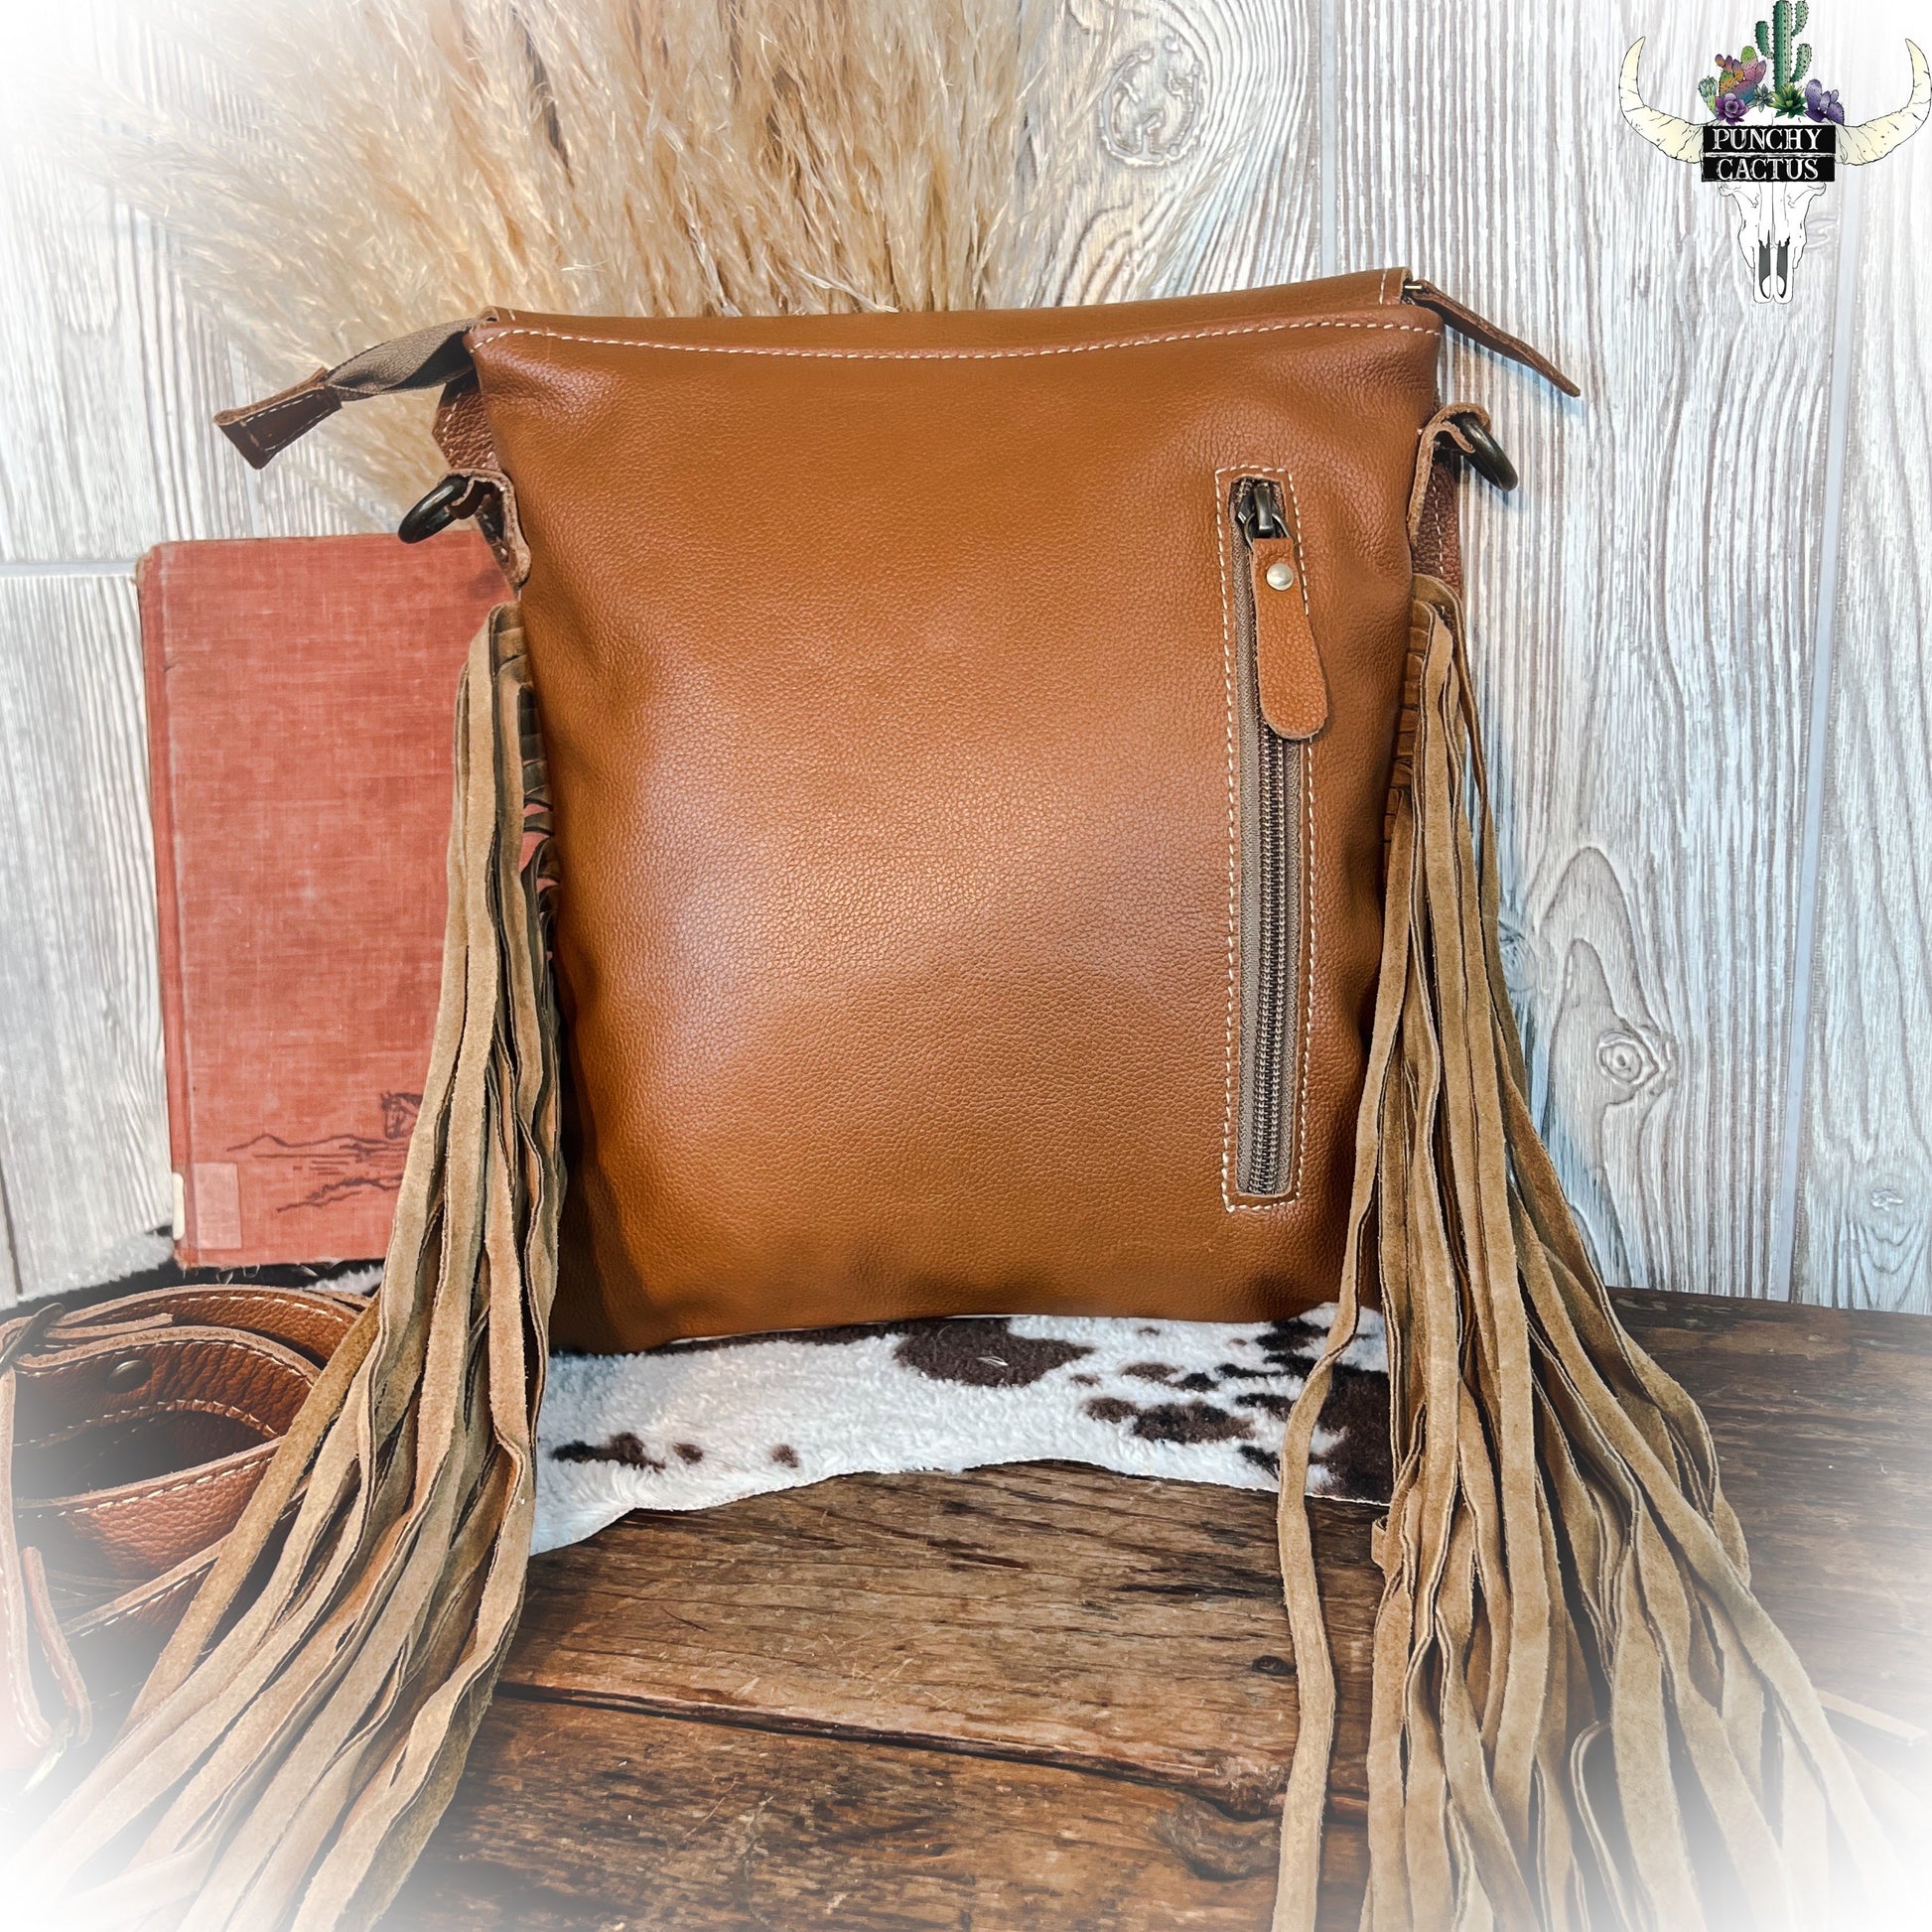 Concealed Carry Western Purse | Punchy Cactus | Western Boutique